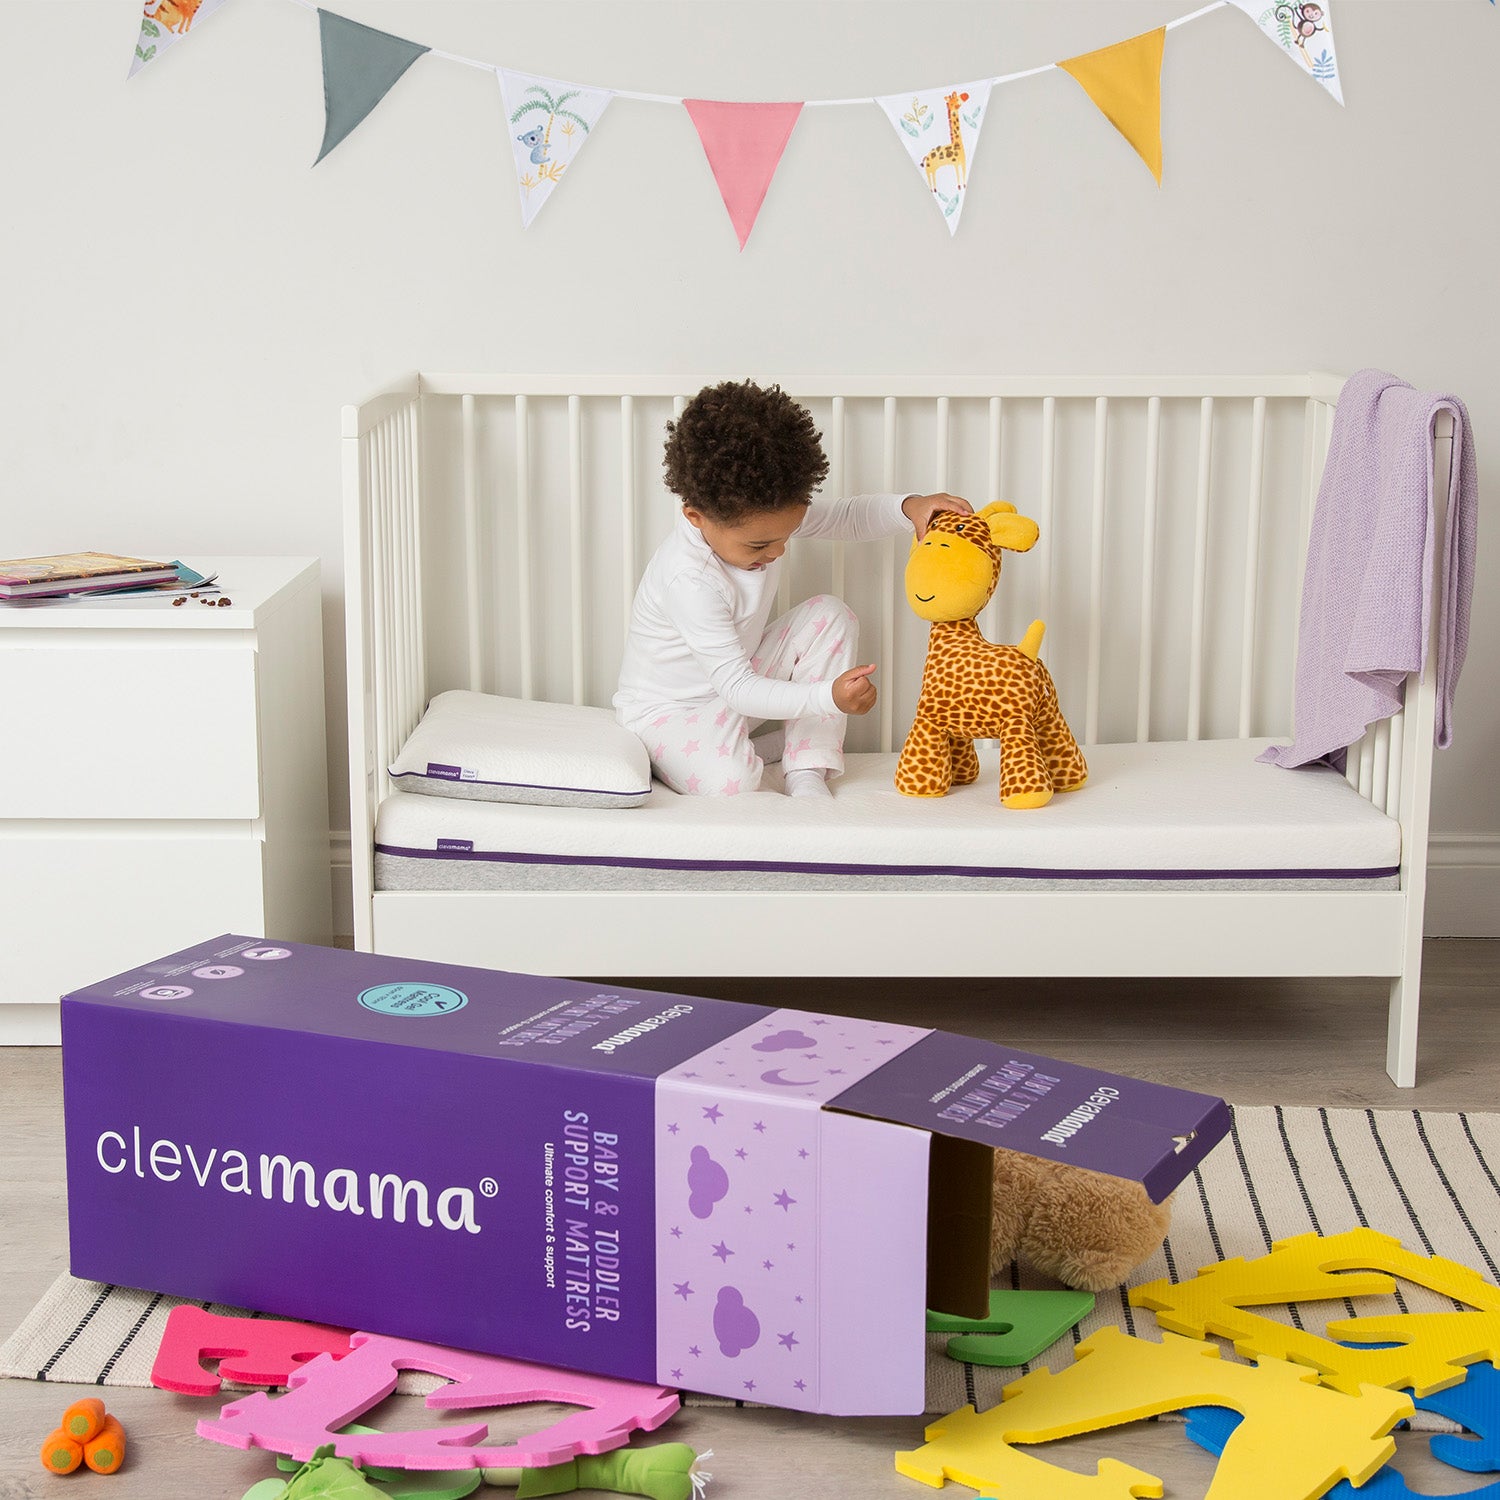 ClevaMama Climate Control Mattress 70 x 140 x 10 cm - Cot Bed Size